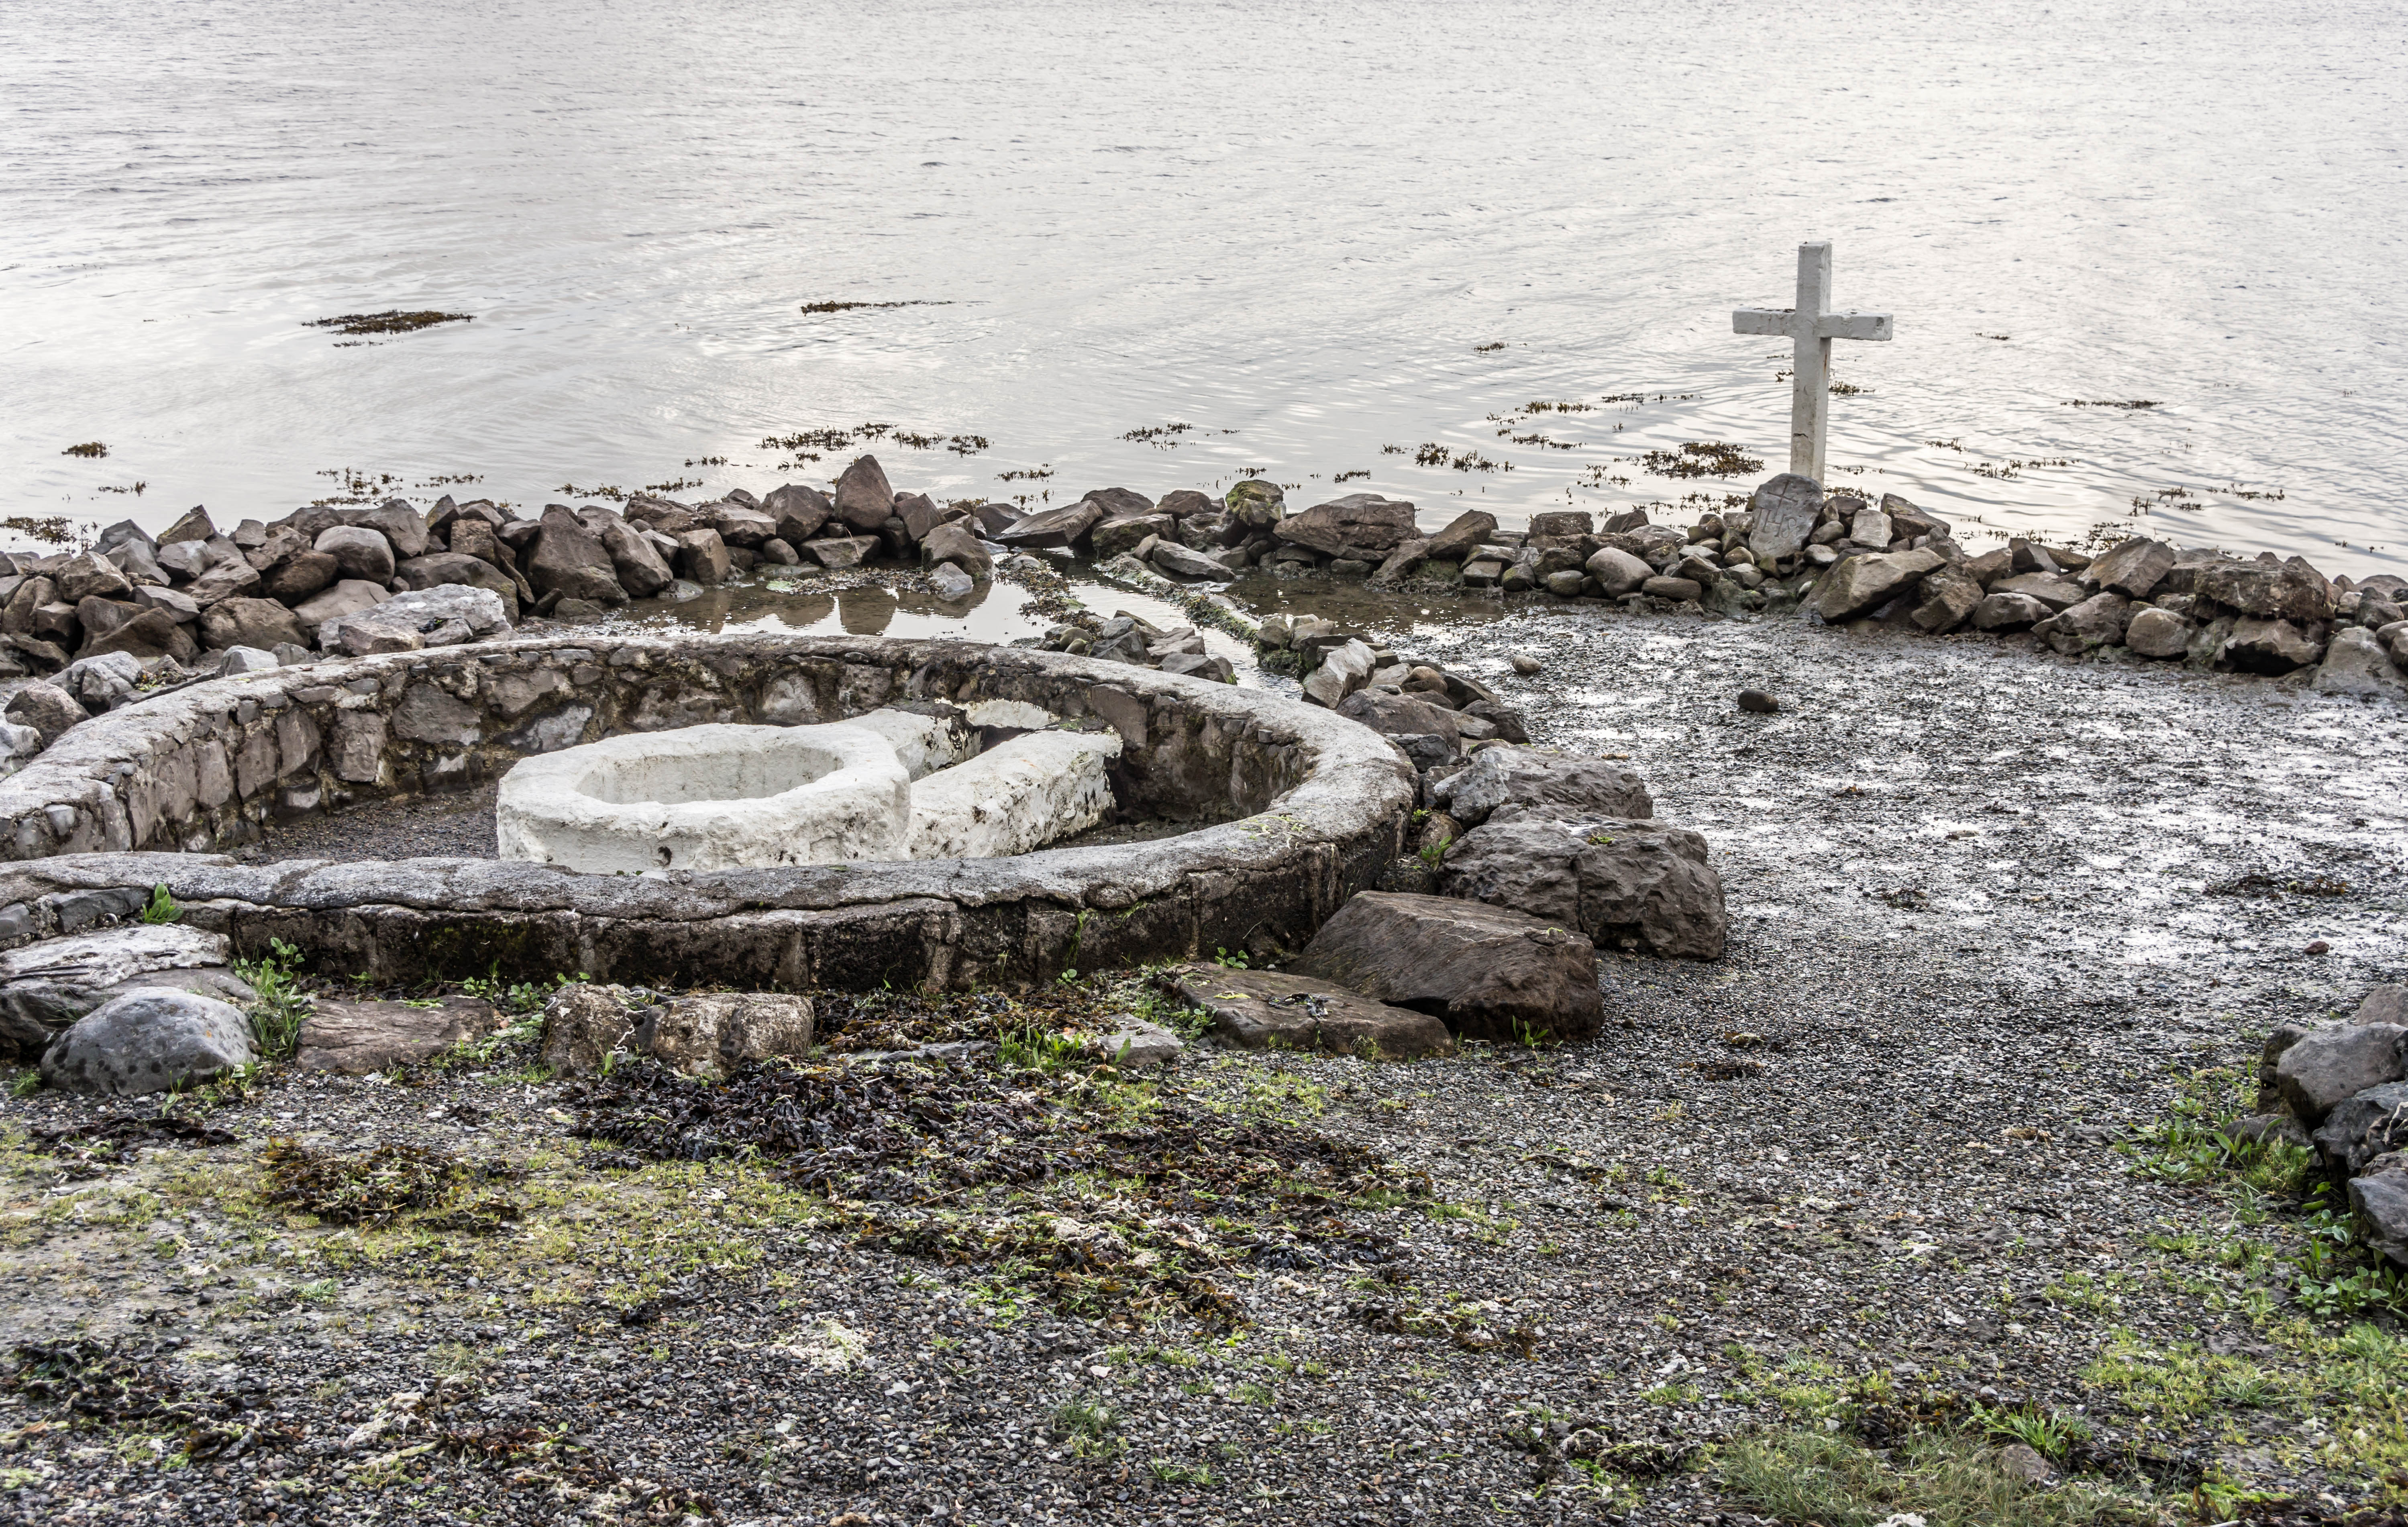  A HOLY WELL IN A TIDAL ZONE -  “ST. AUGUSTINE’S HOLY WELL  